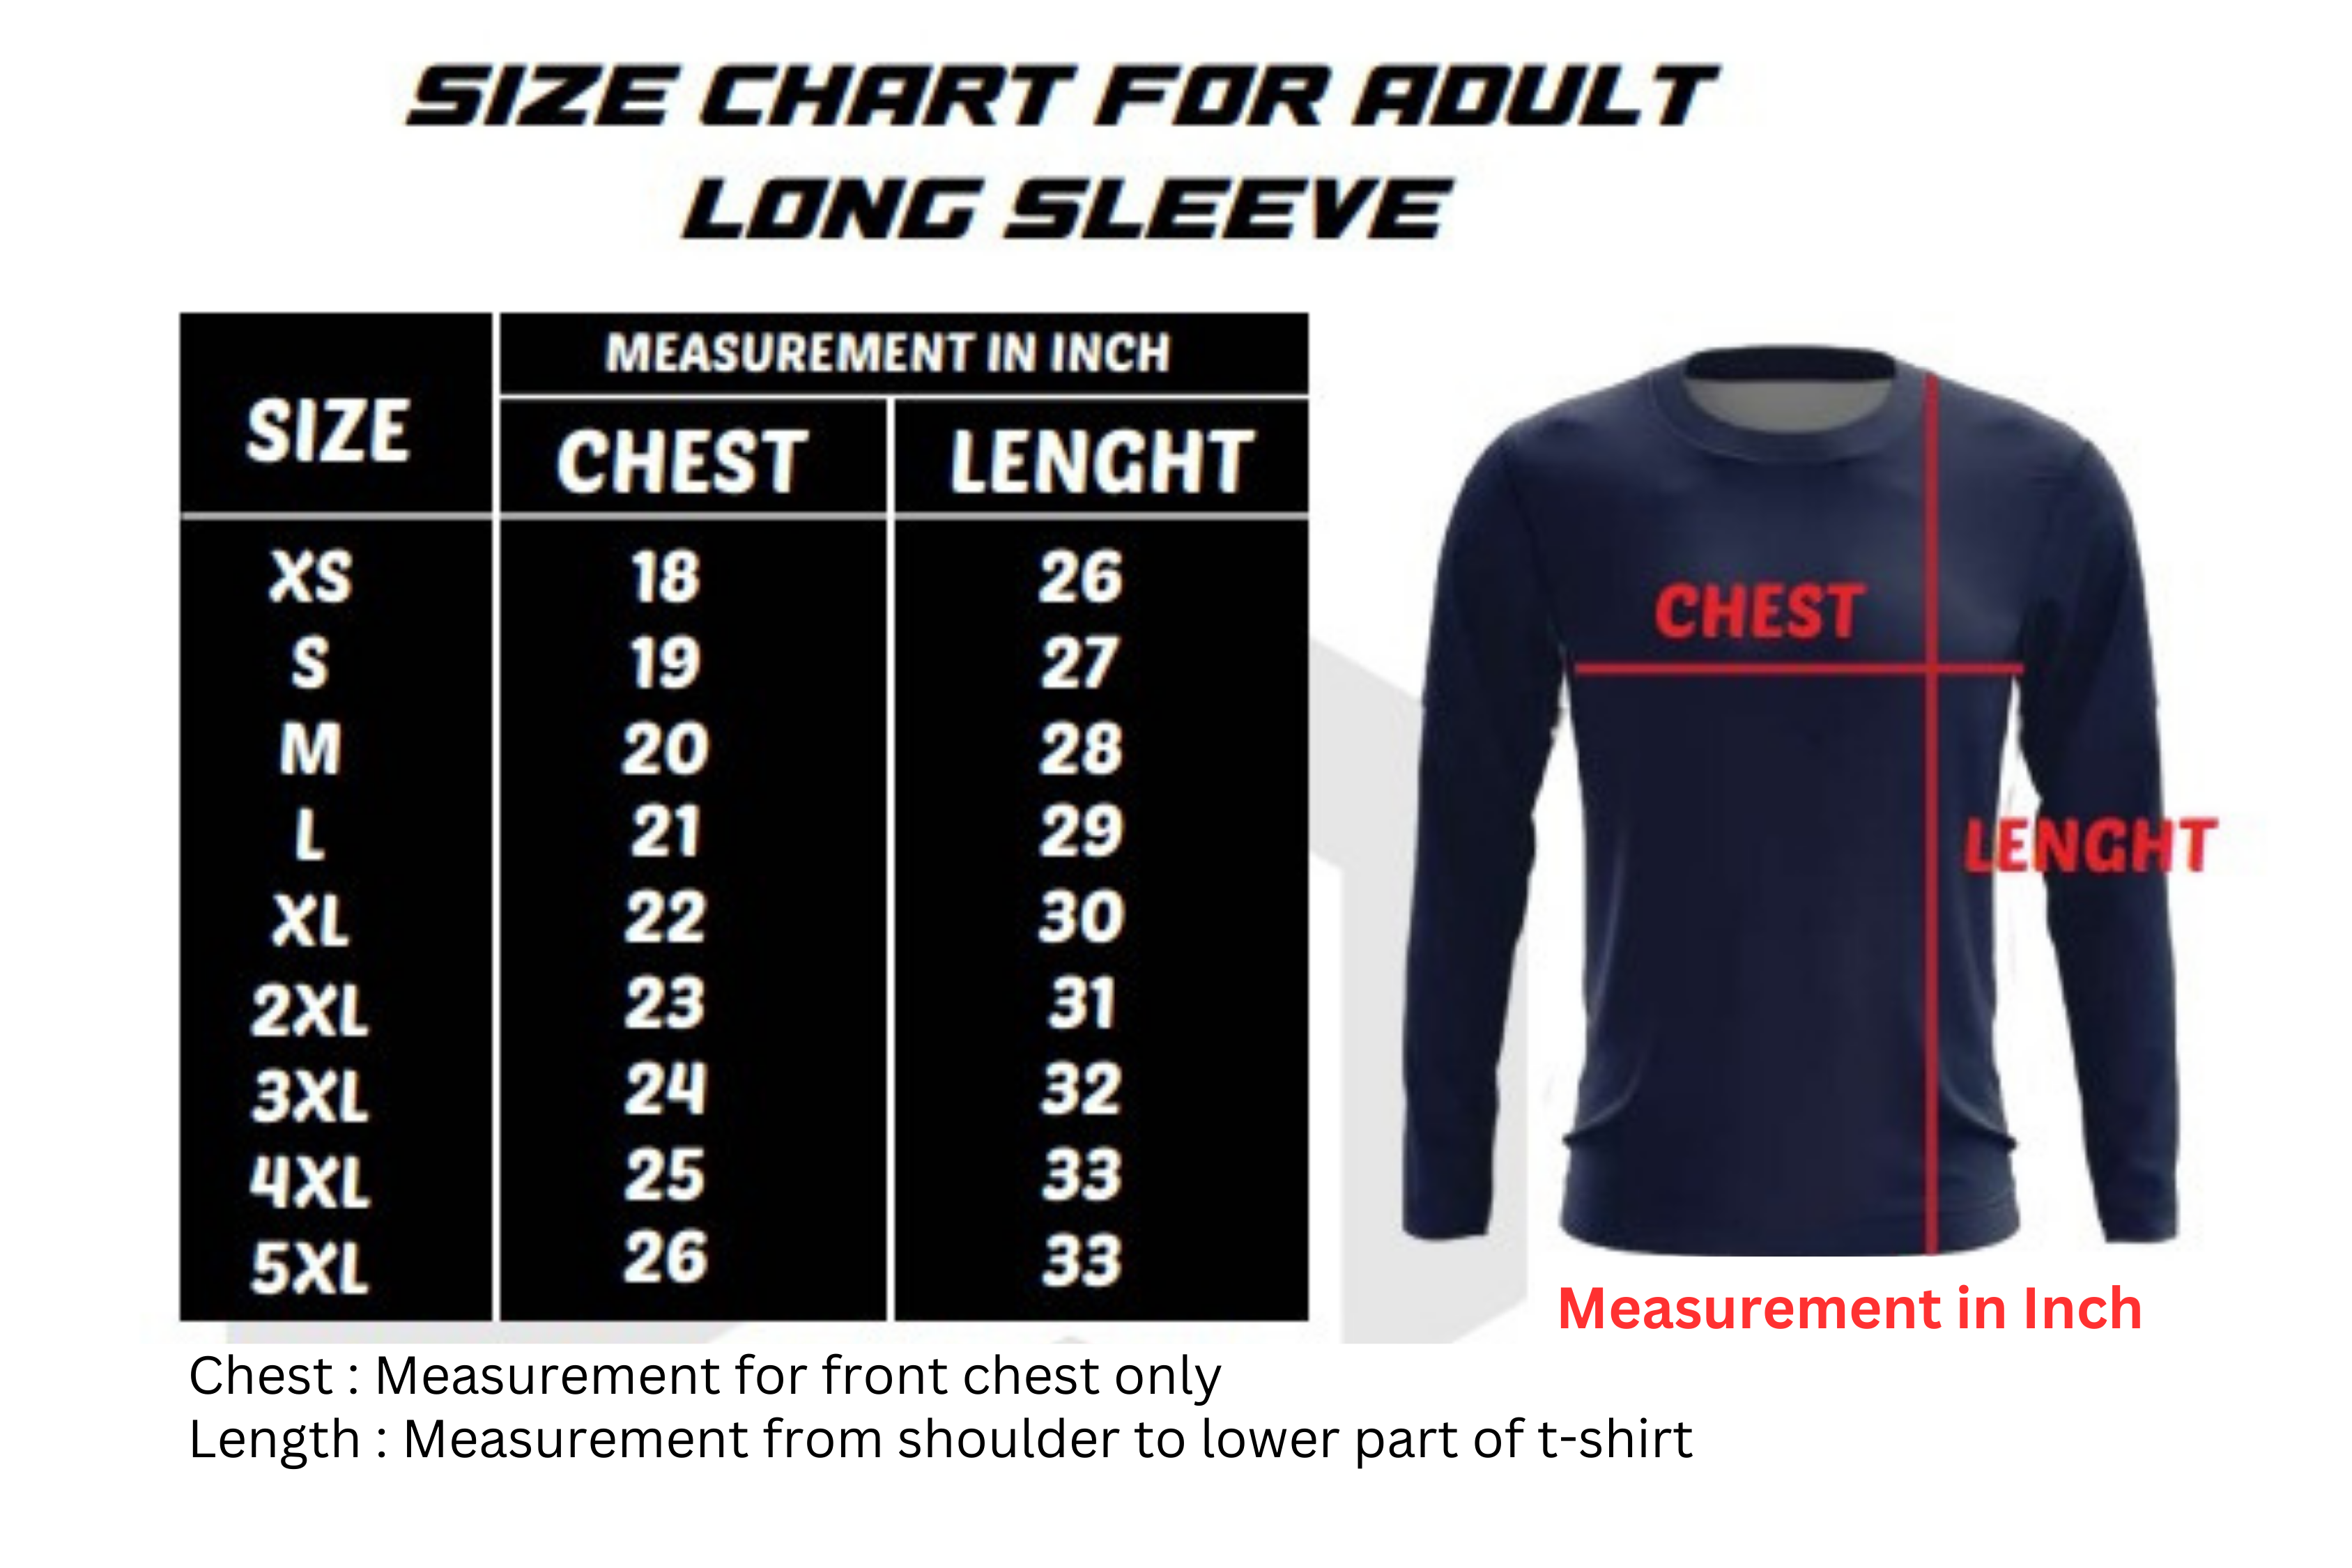 Note Please be informed that ‘age’ is not an absolute reference for size measurement. There are some kids who younger but wearing big size. So please measure according to ‘chest’ to get better mea (3)